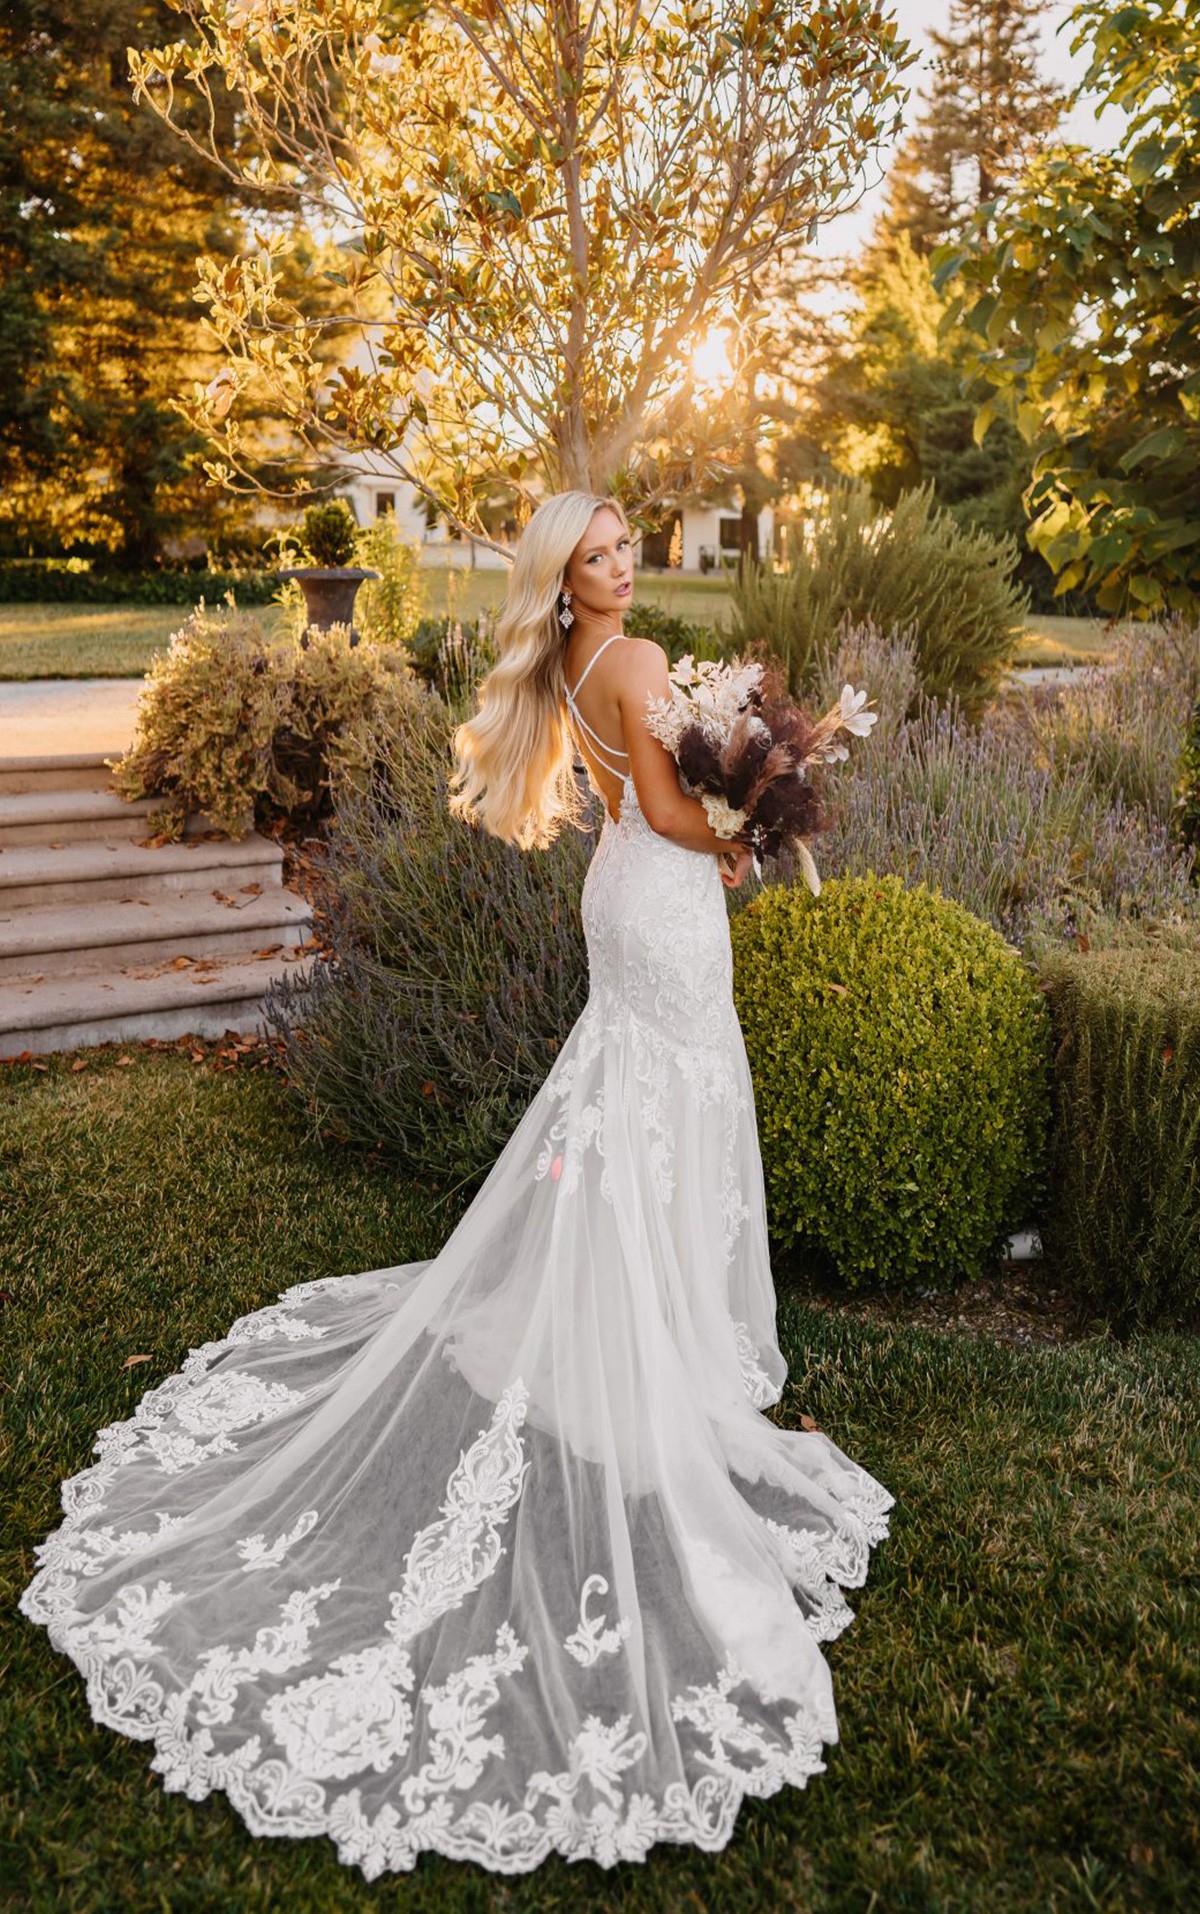 7394 - Monaco - Stella York 7394 Stunning scrappy back wedding dress with fitted lace skirt & train at Blessings Bridal Shop 3 Loyal Parade, Mill Rise, Westdene, Brighton. East Sussex BN1 5GG T: 01273 505766 E: info@blessingsbridal.co.uk